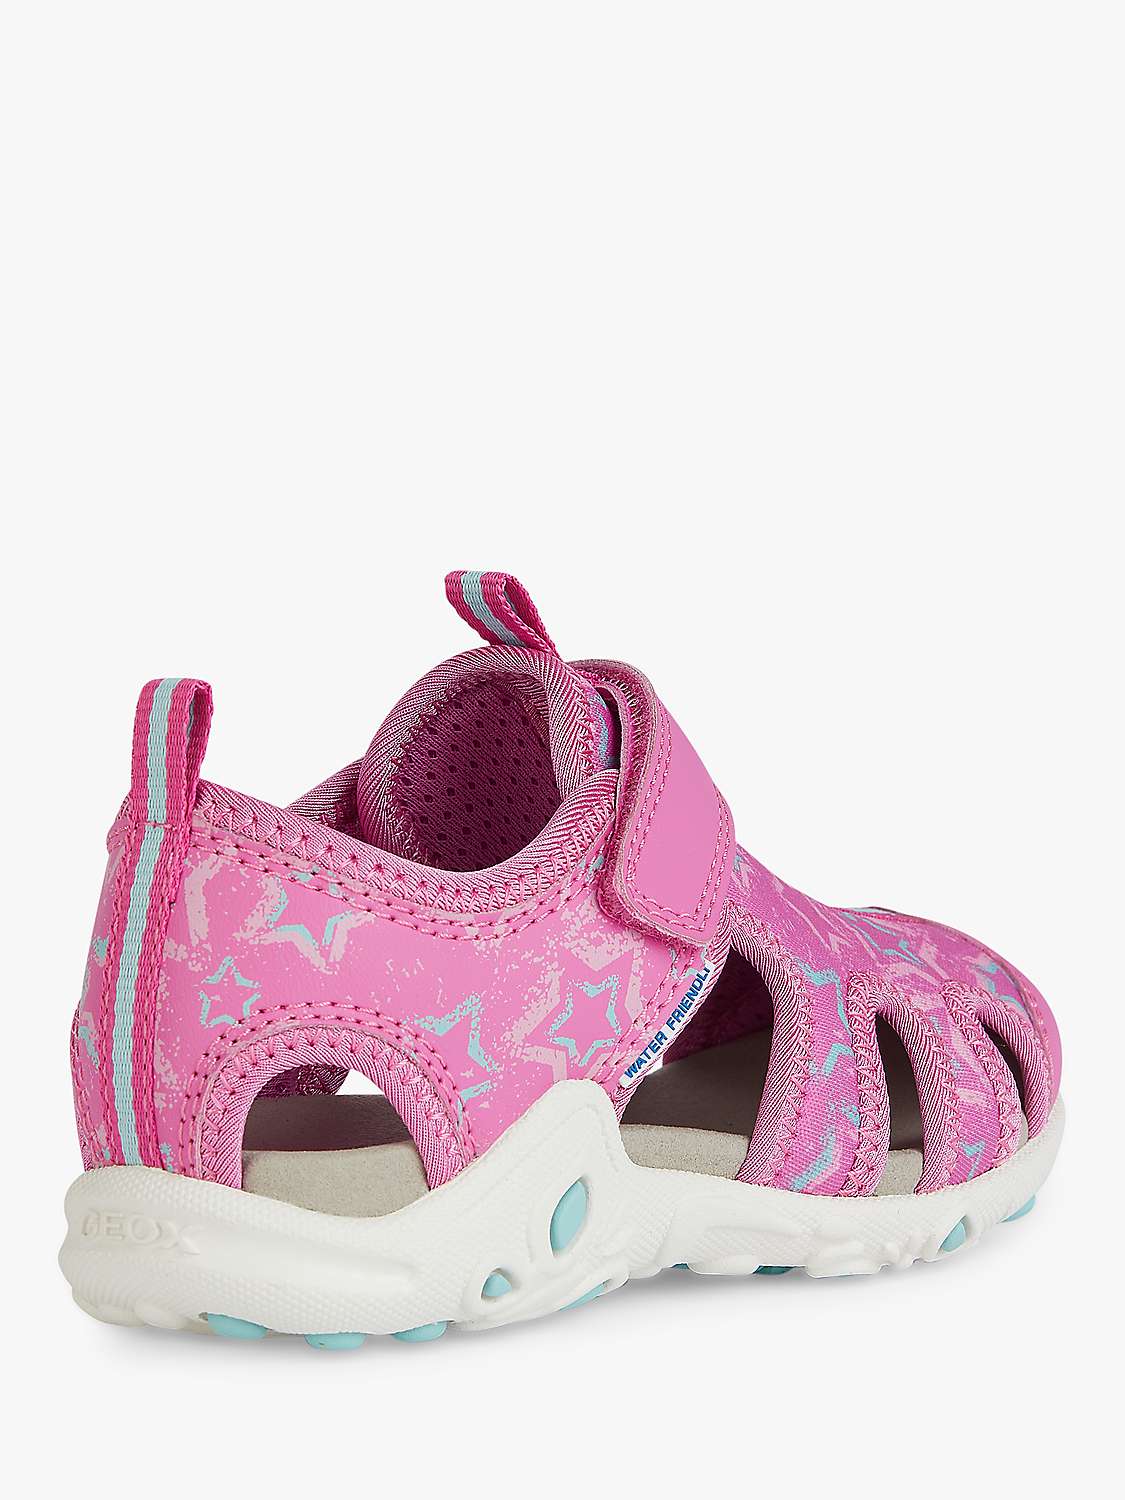 Buy Geox Kids' Whinberry Star Print Closed Toe Sandals Online at johnlewis.com